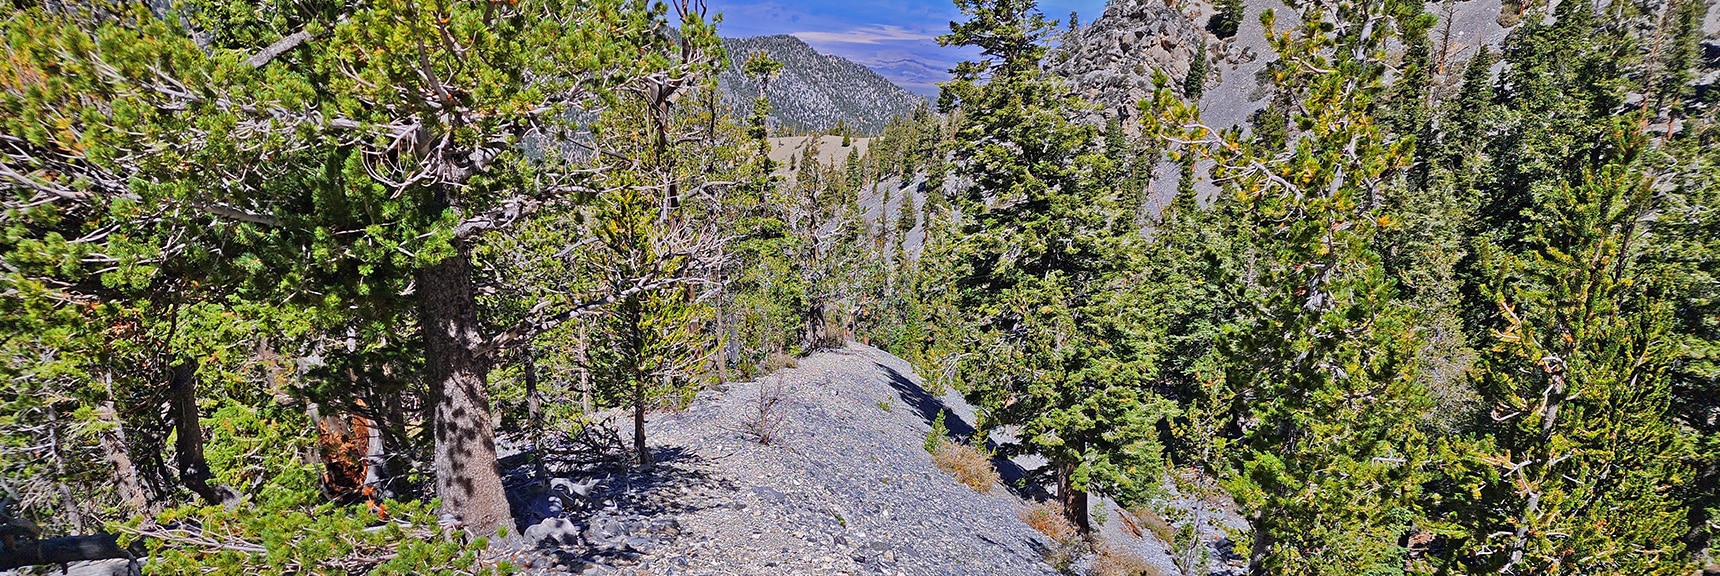 Descending Mummy's Head Approach Trail. Where Did It Originate? | Mummys Head | Lee Canyon | Mt Charleston Wilderness | Spring Mountains, Nevada